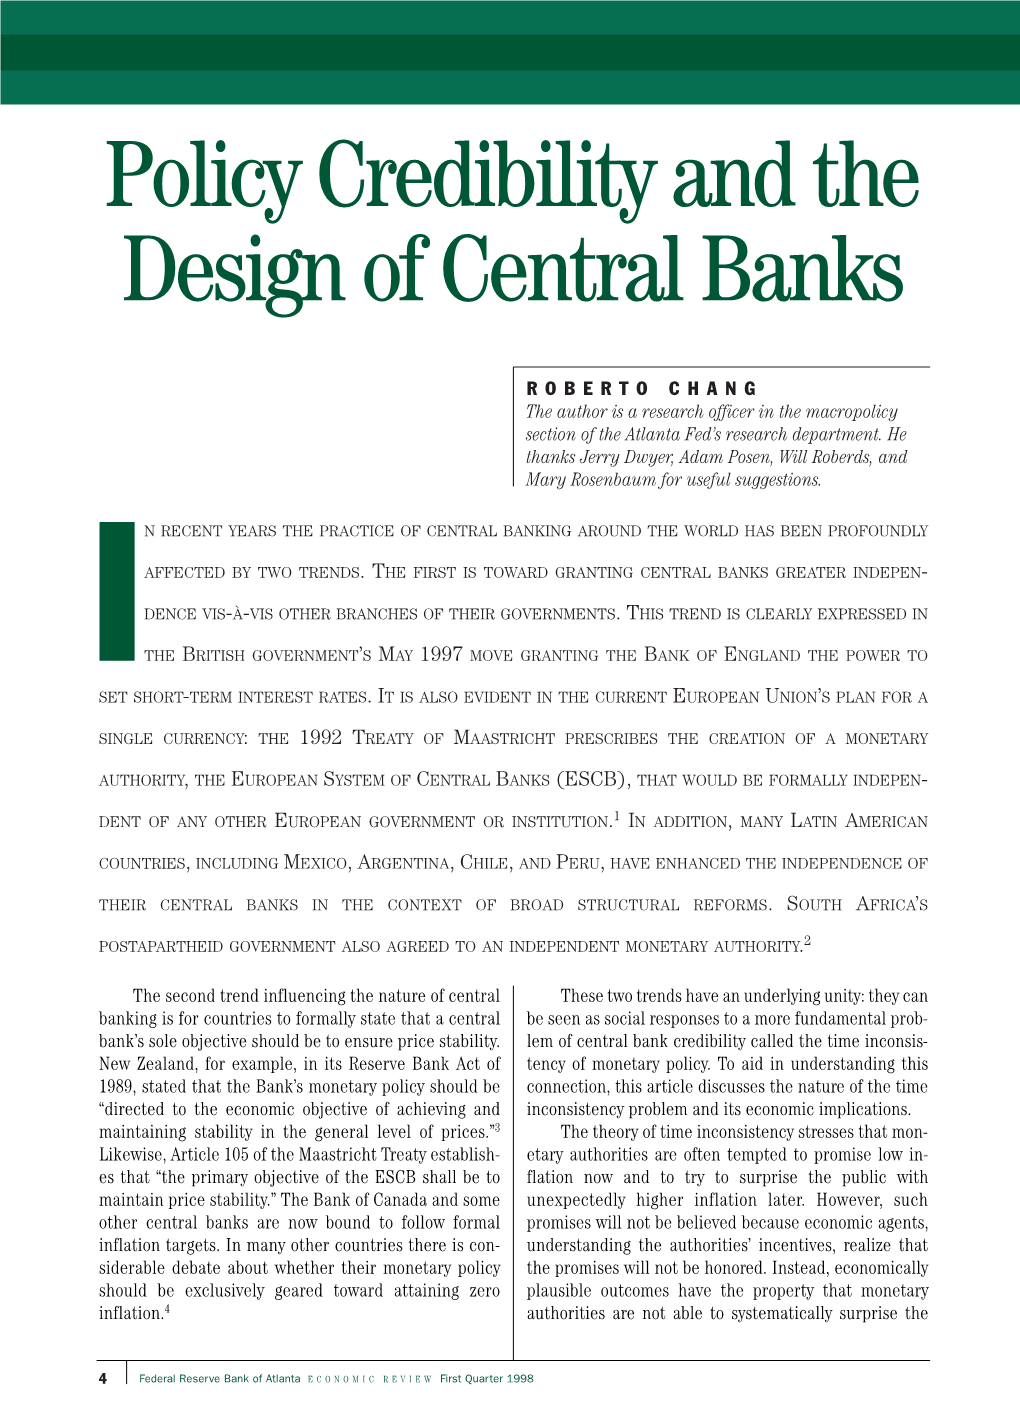 Policy Credibility and the Design of Central Banks